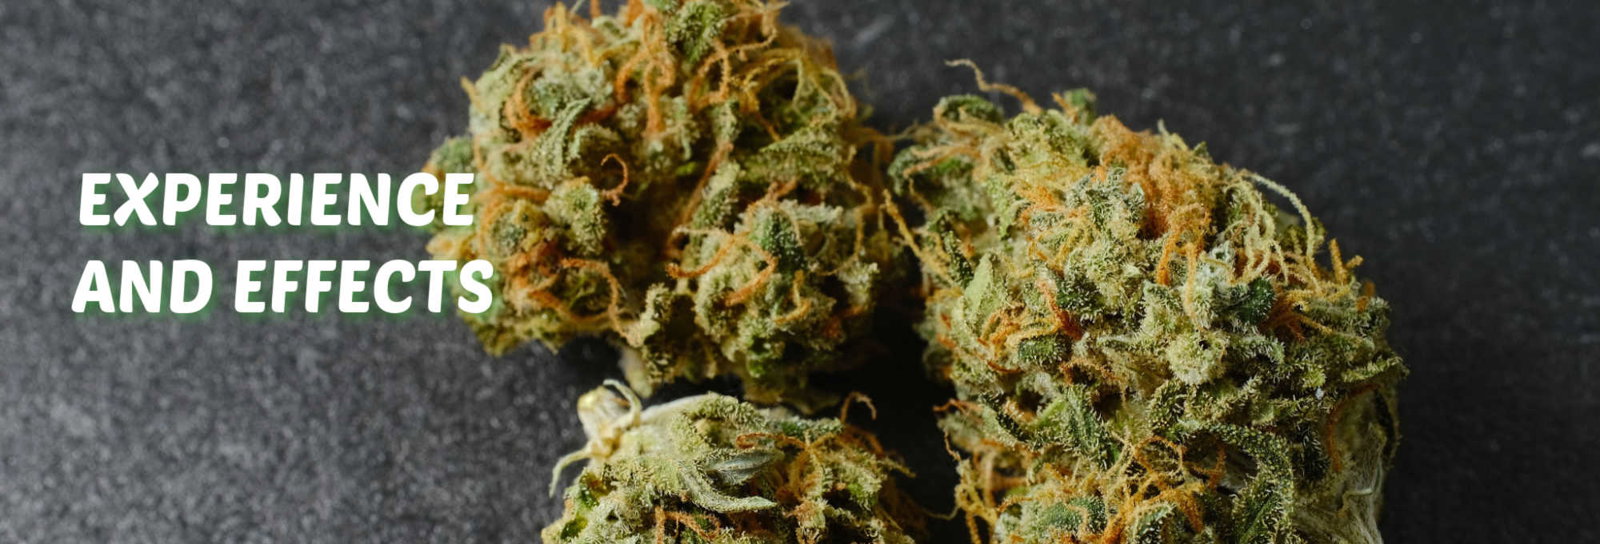 image of candy jack cannabis strain experience and effects